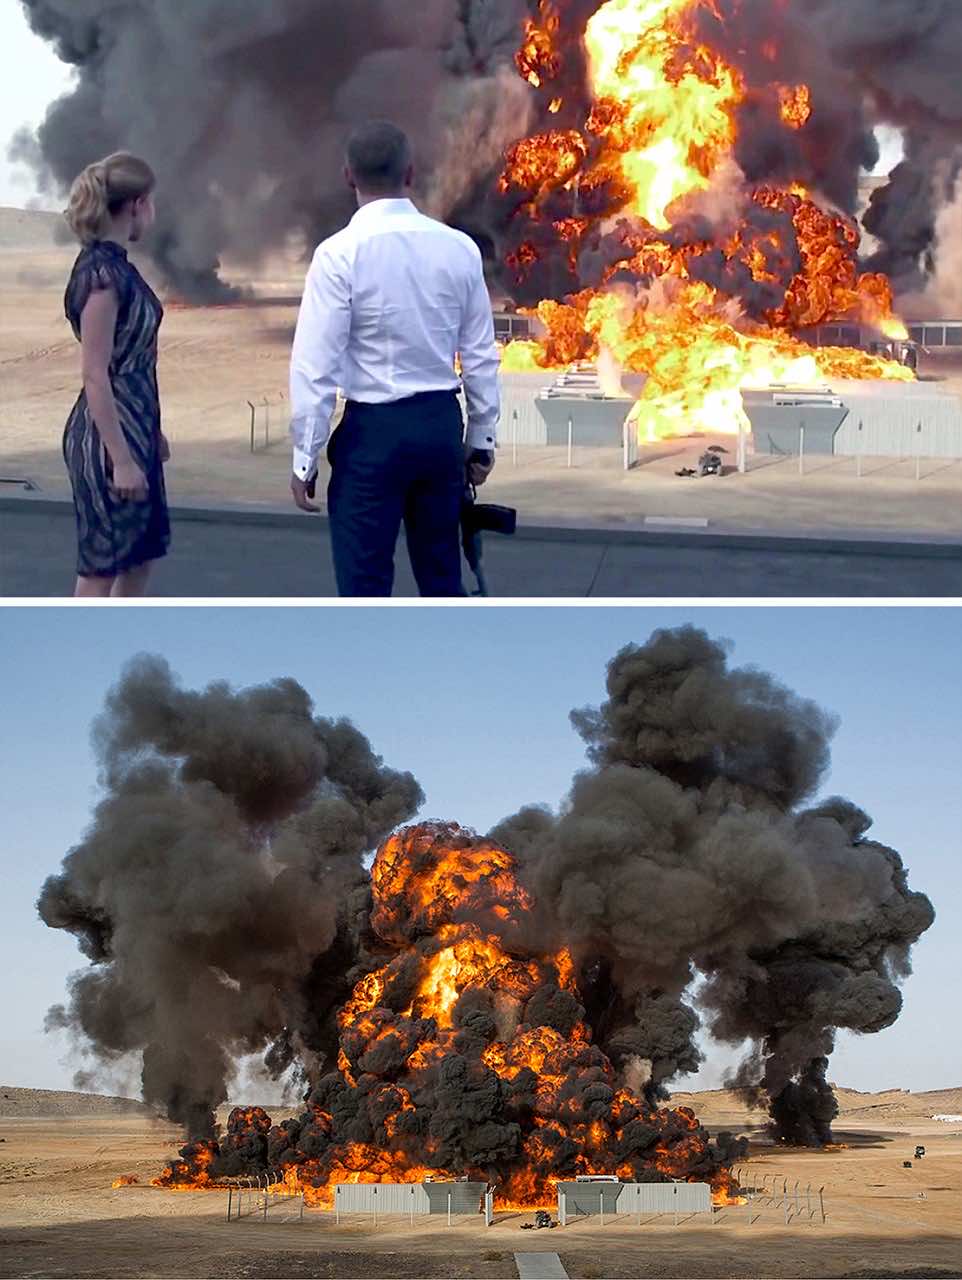 Spectre (2015) - (TOP) James Bond (Right) with Bond girl Madeleine (Léa Seydoux) watch the demse of Blofeld's base - filmed in Erfoud , Morocco (BOTTOM) The 24th Bond film features the largest film detonation of all time, with 70 tons of TNT used. The explosion lasted 7.5 seconds. /